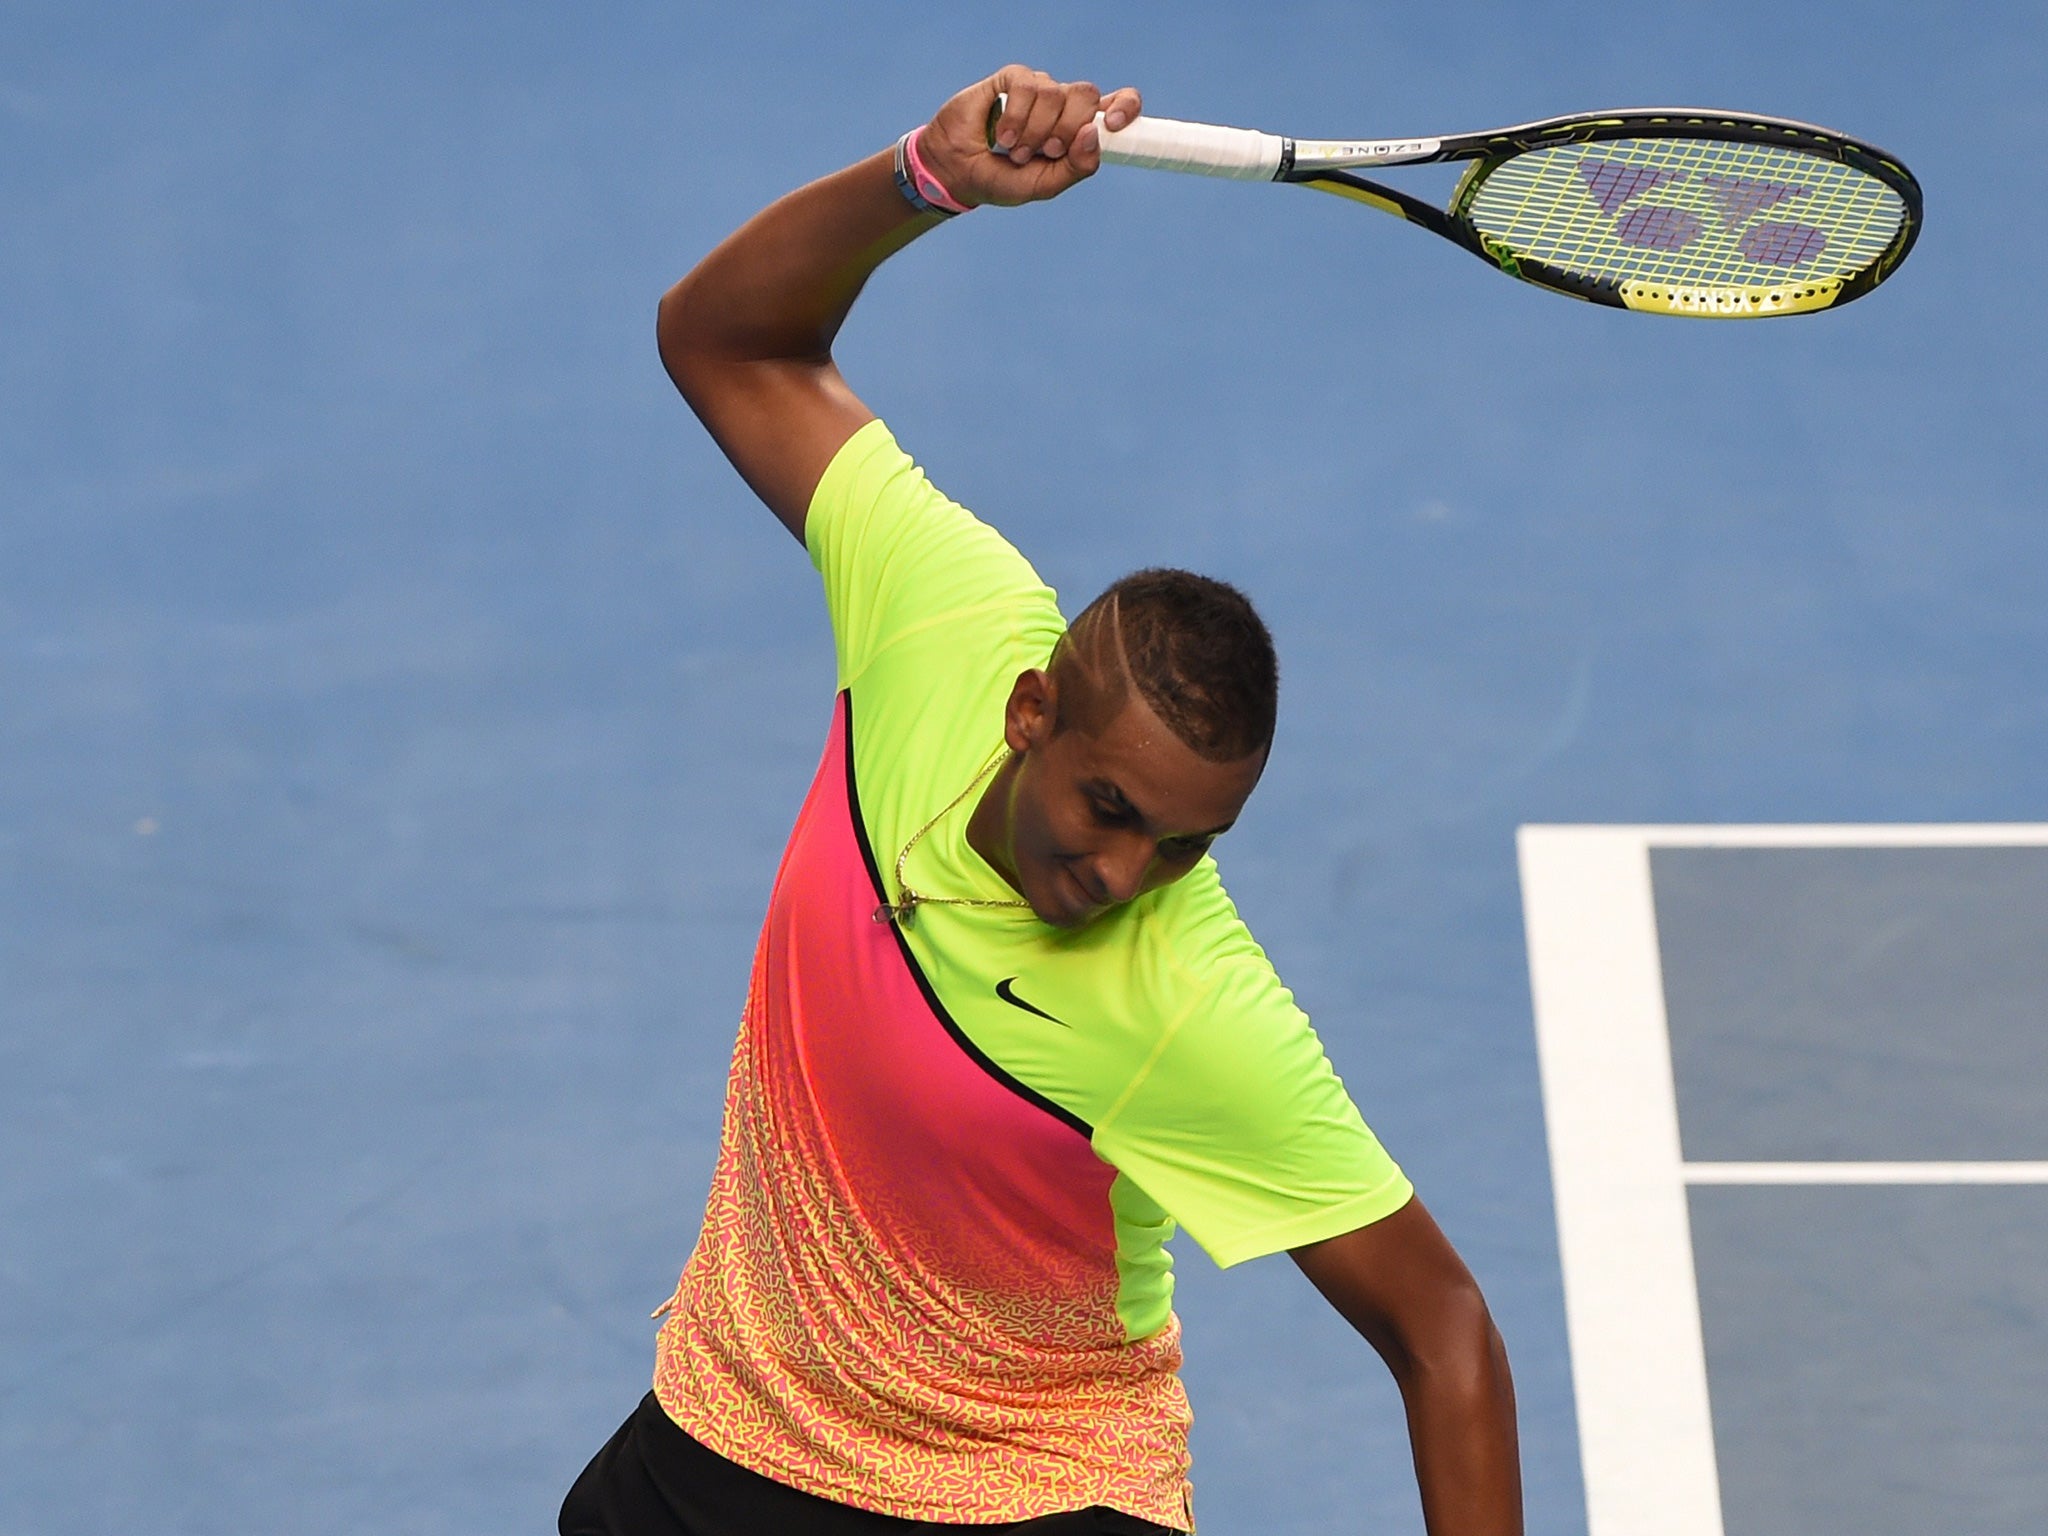 Nick Kyrgios in a typical pose